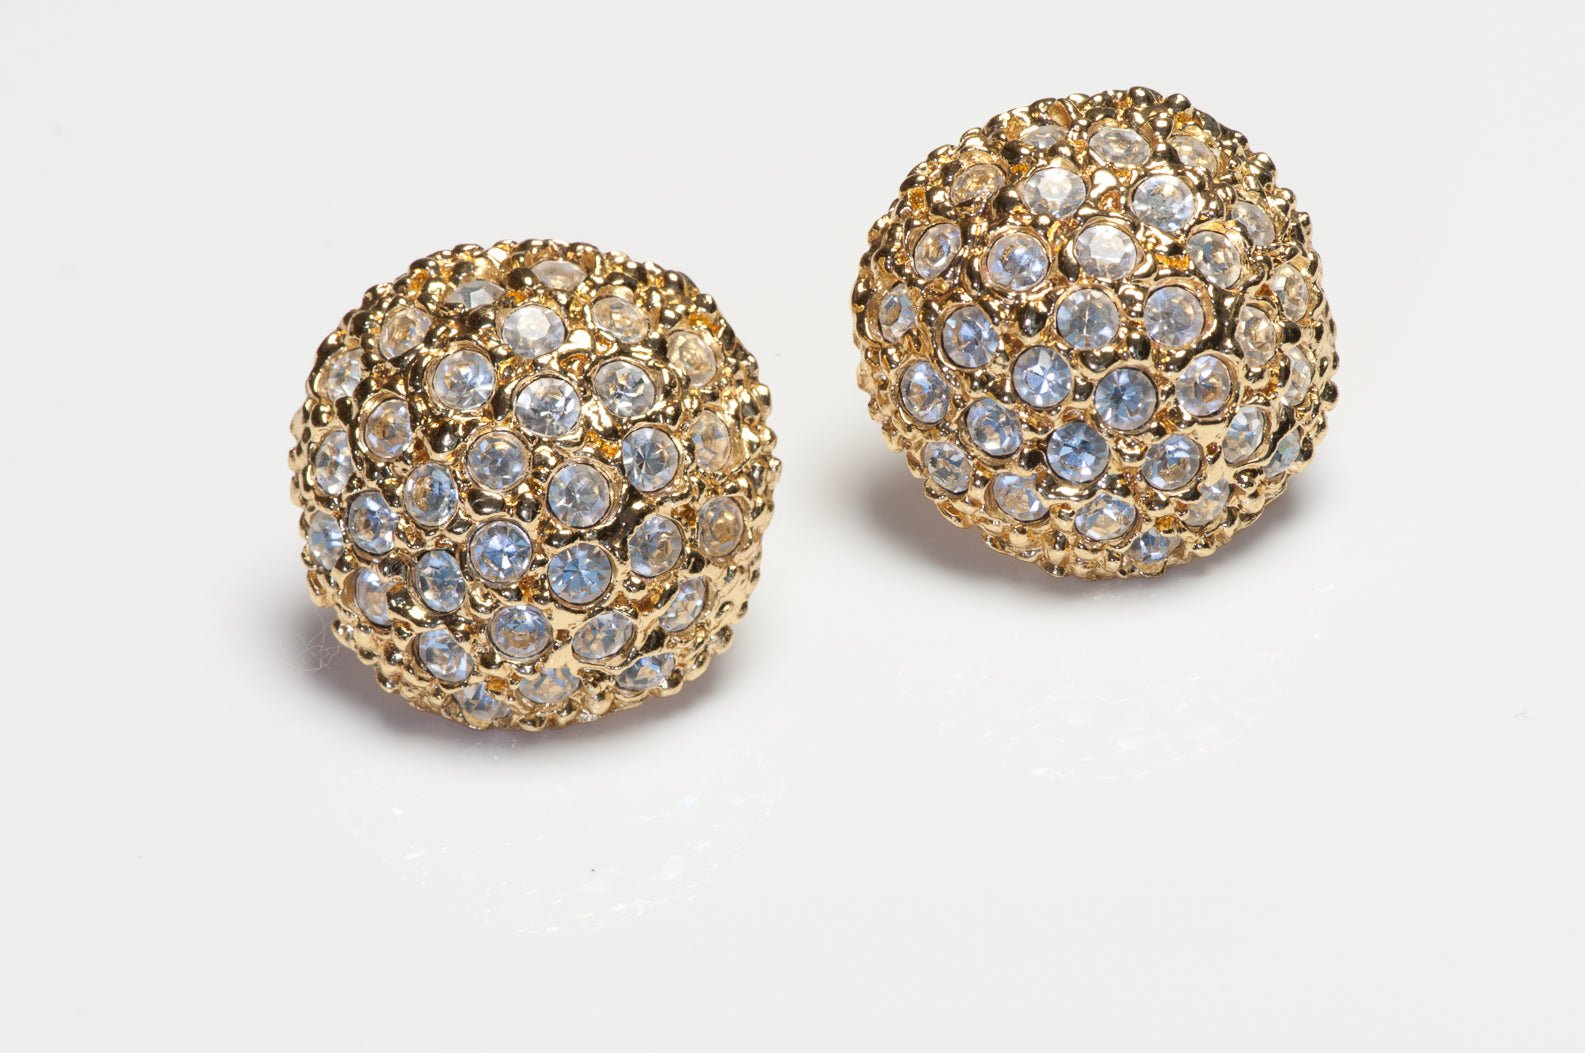 Vintage Yves Saint Laurent YSL Gold Plated Crystal Dome Earrings